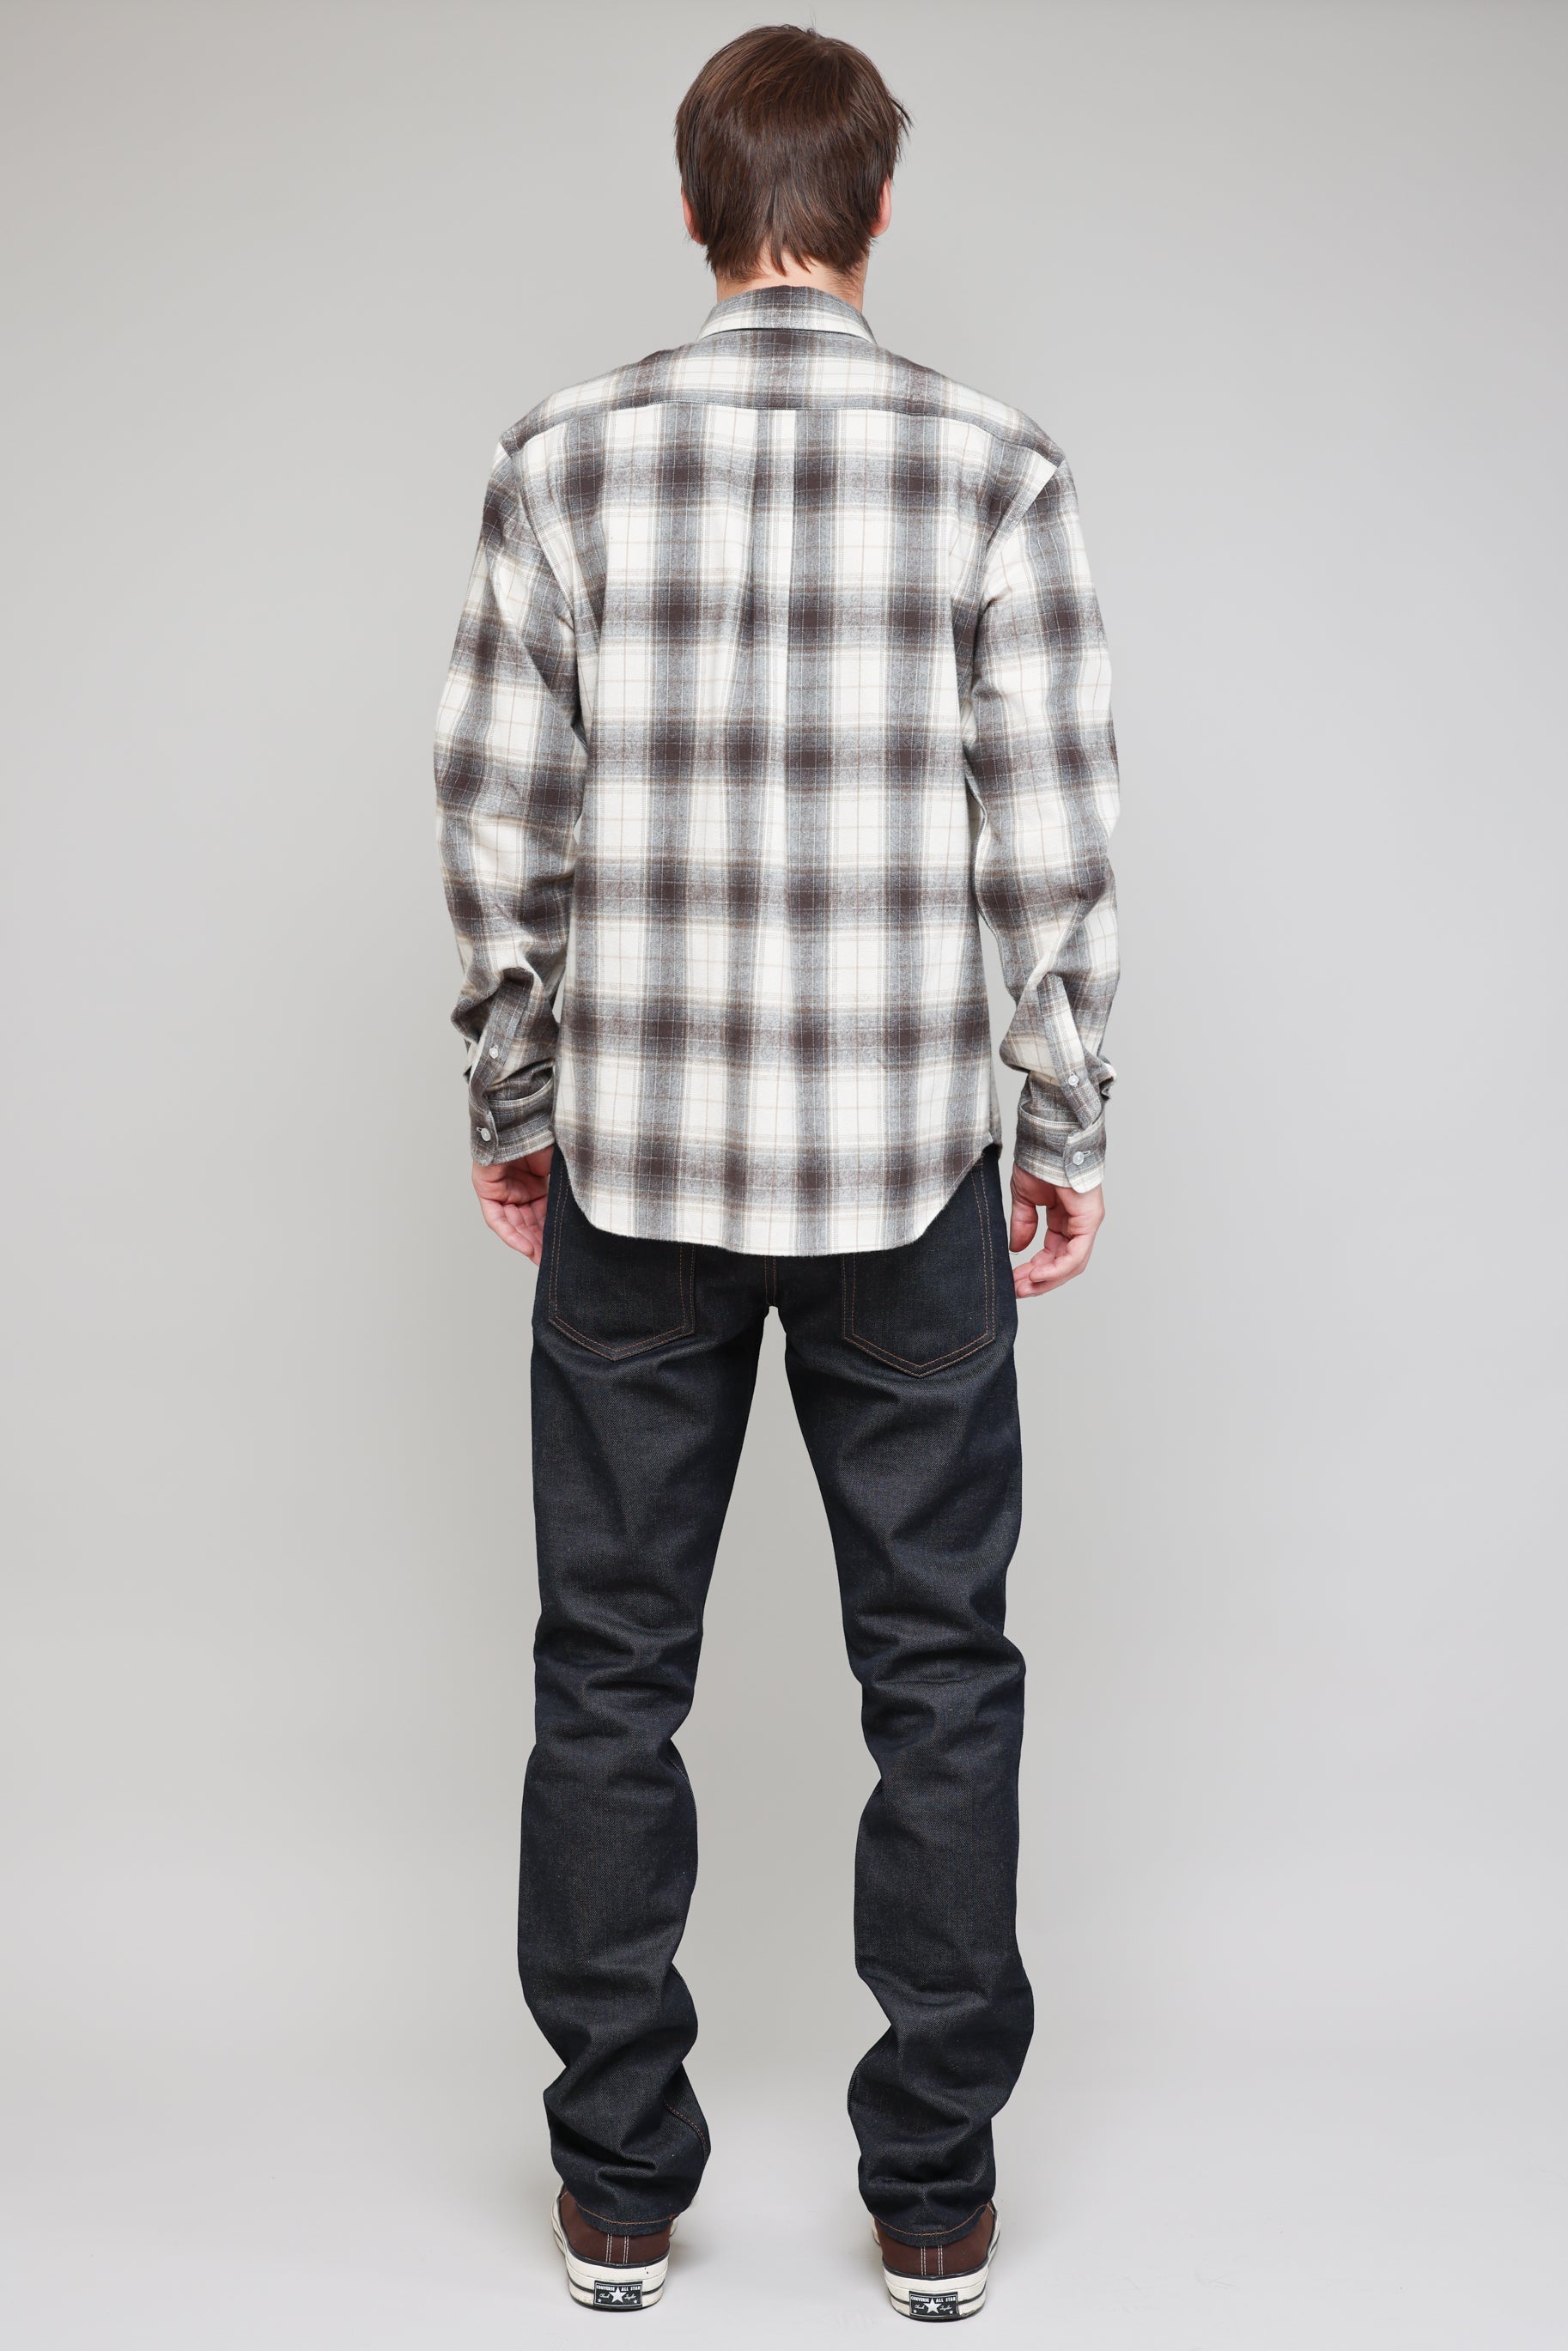 Japanese Shaggy Plaid in Brown and White 03